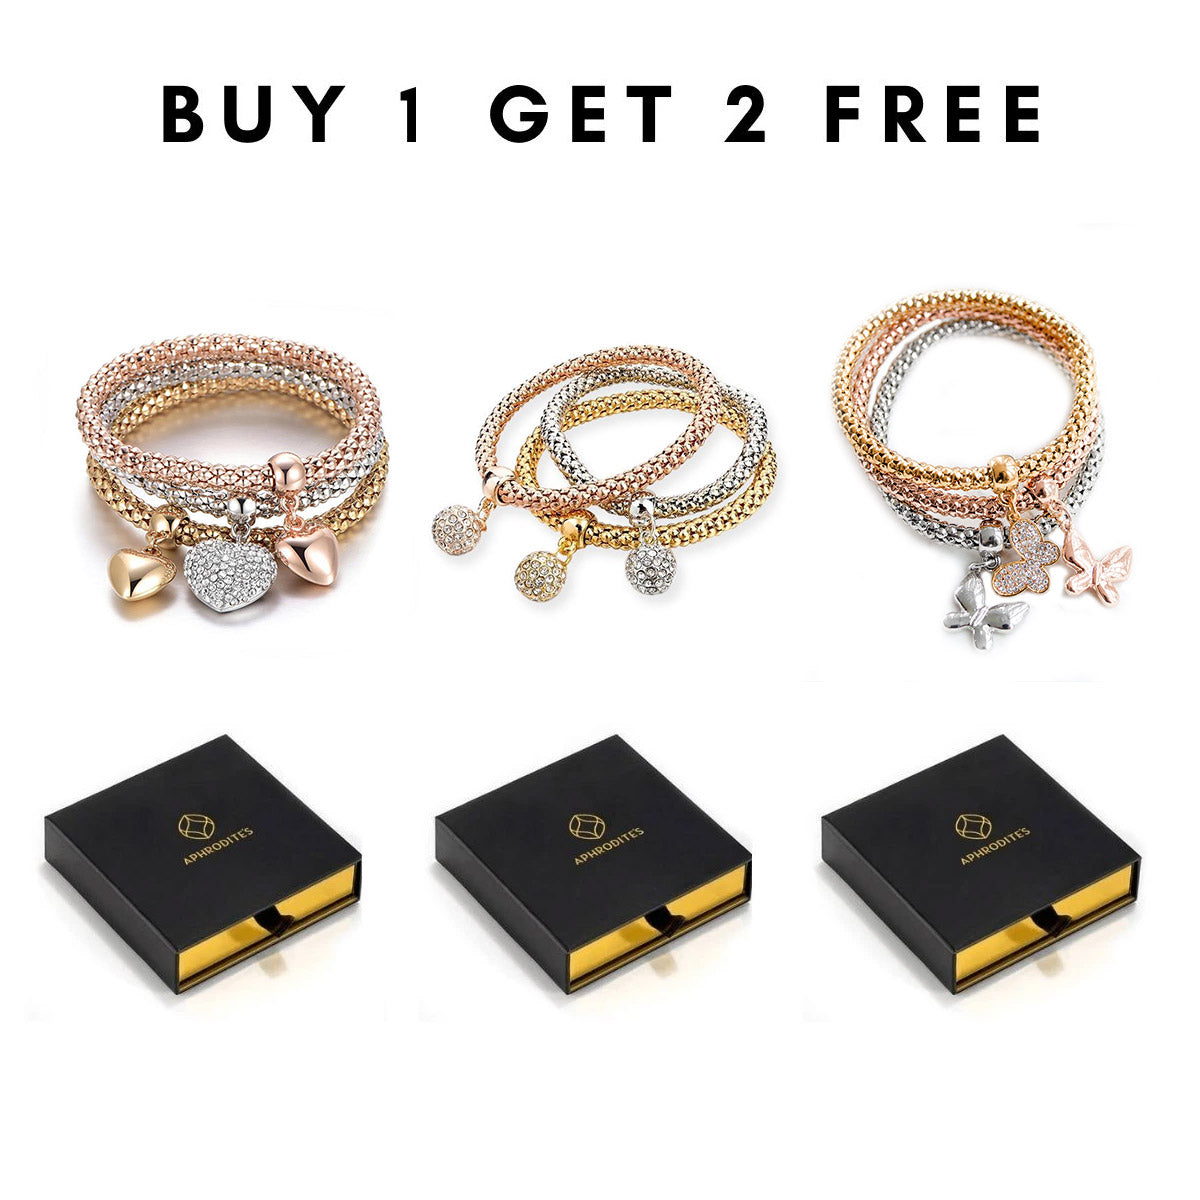 BUY 1 GET 2 FREE Glam Trio of Sparkle